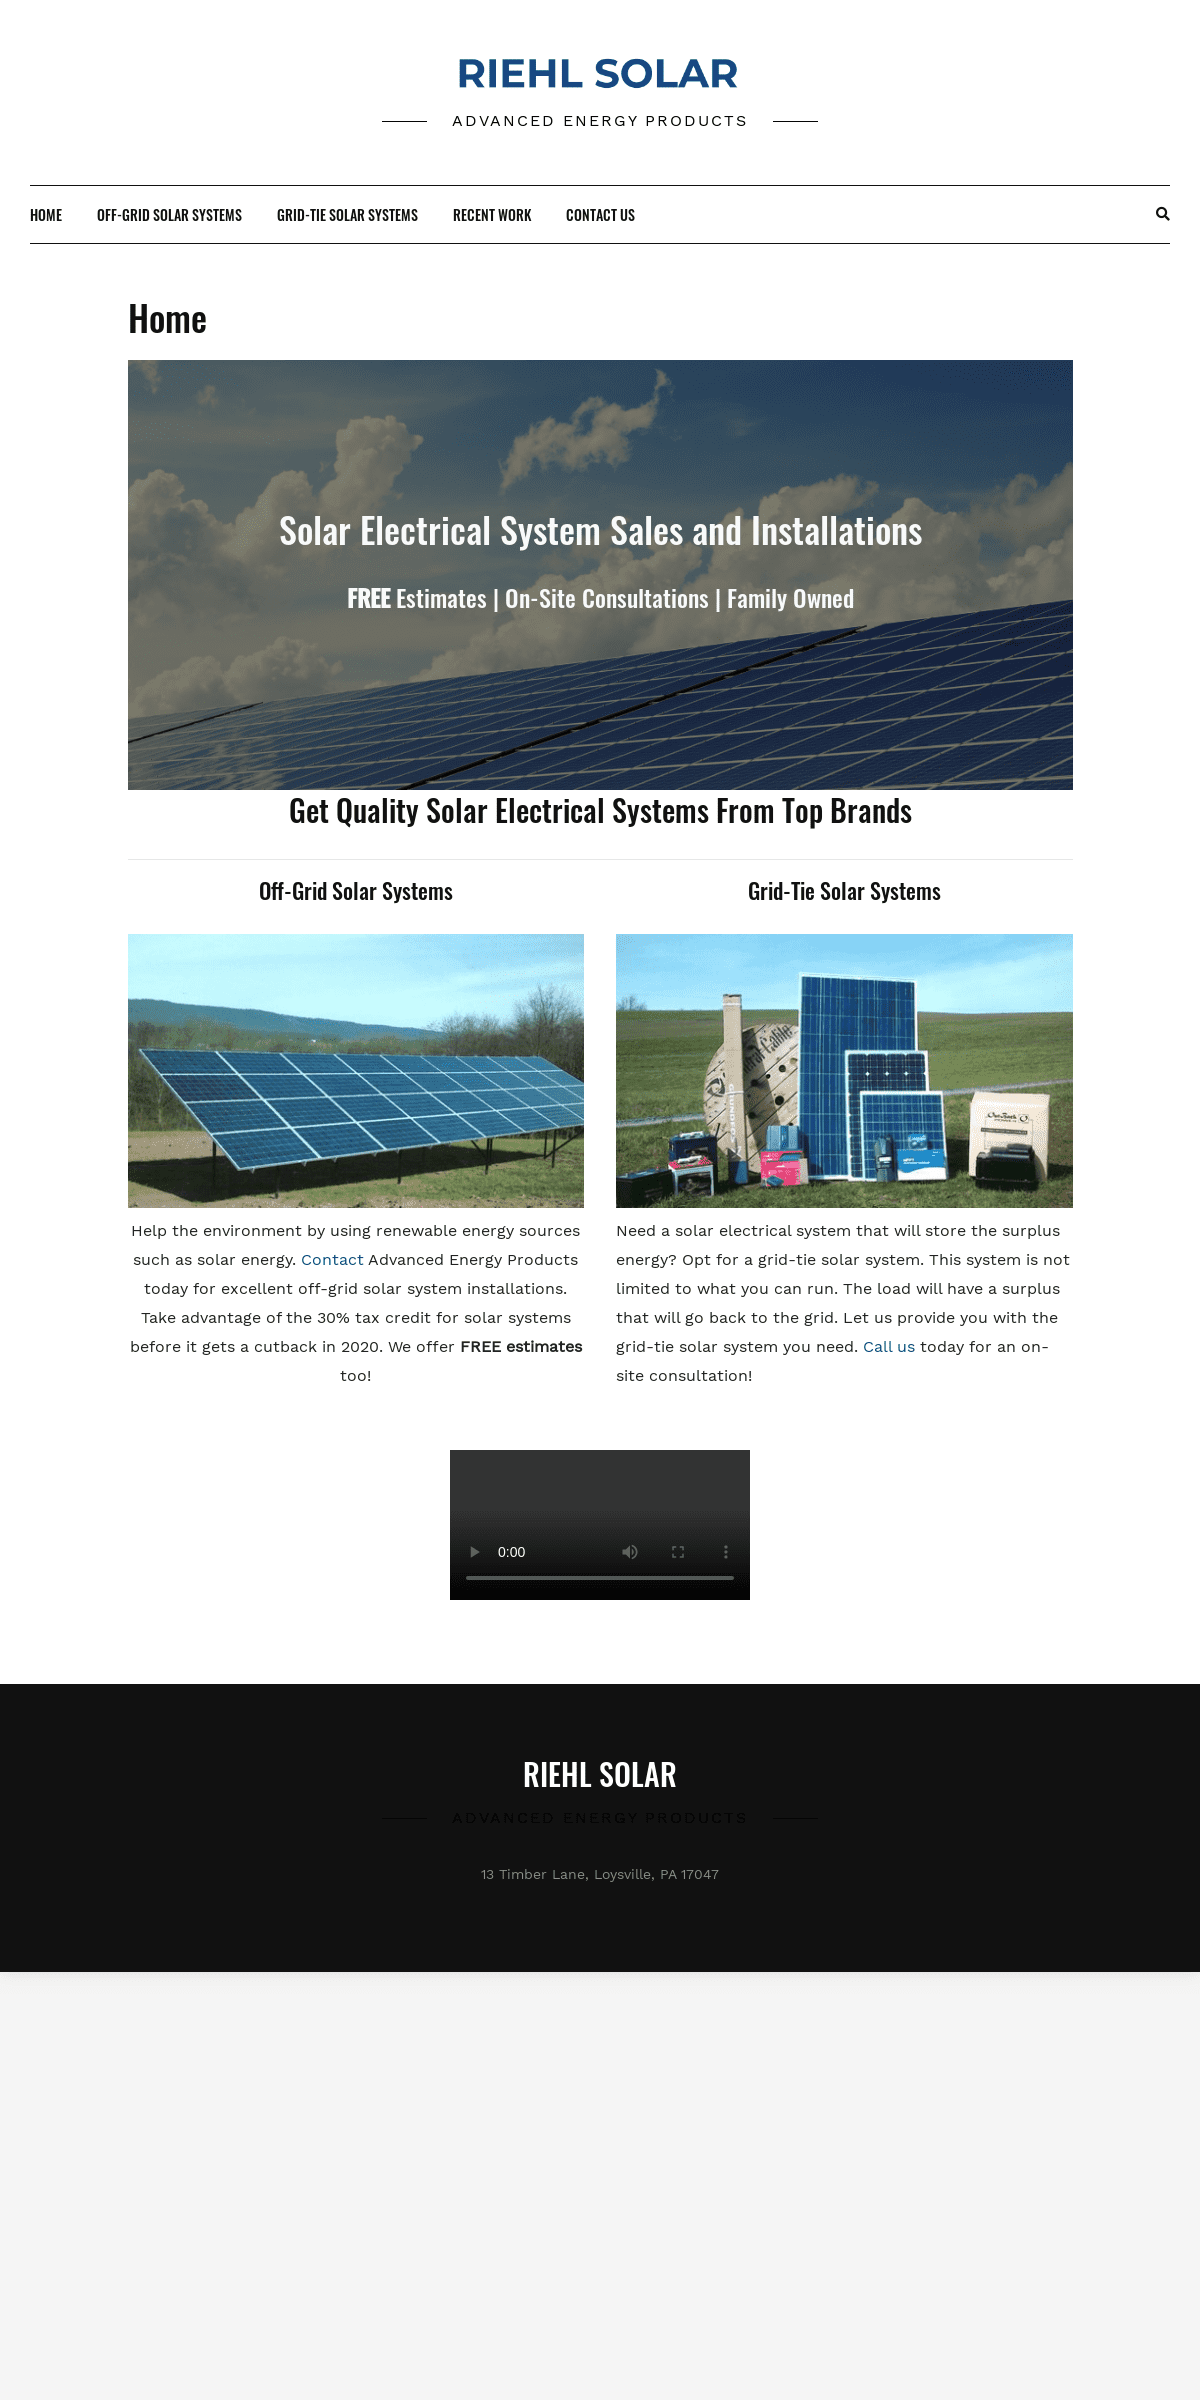 A complete backup of riehlsolar.com